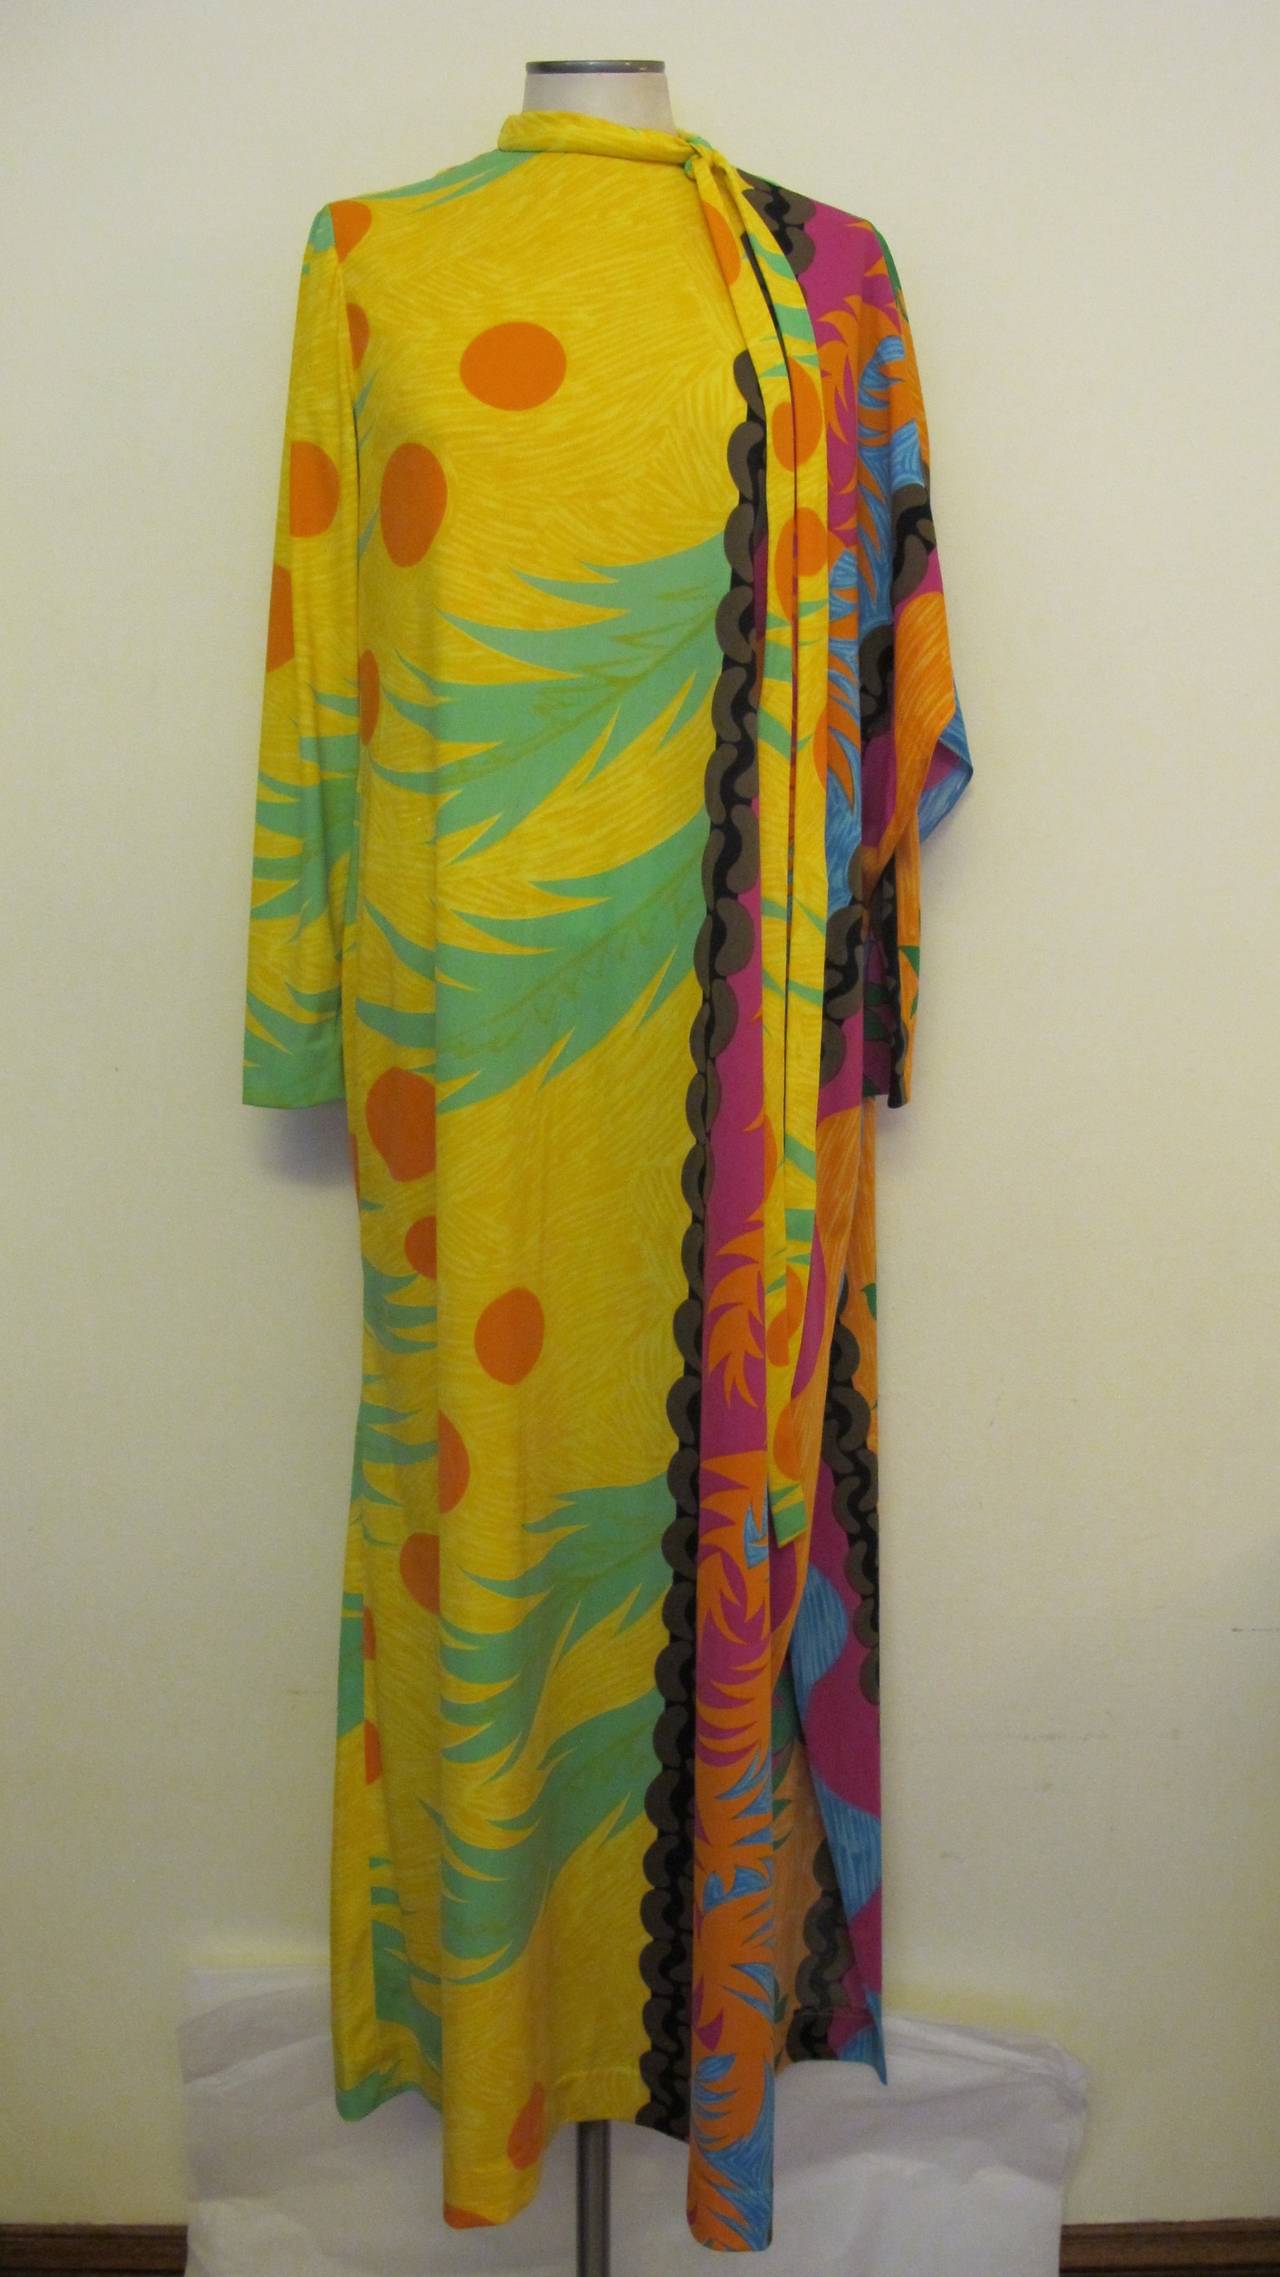 Youssef Rizkallah was the designer from 1969 to 1975 for Malcolm Starr. This fabulous tropical piece features sunset colors, palm trees and 